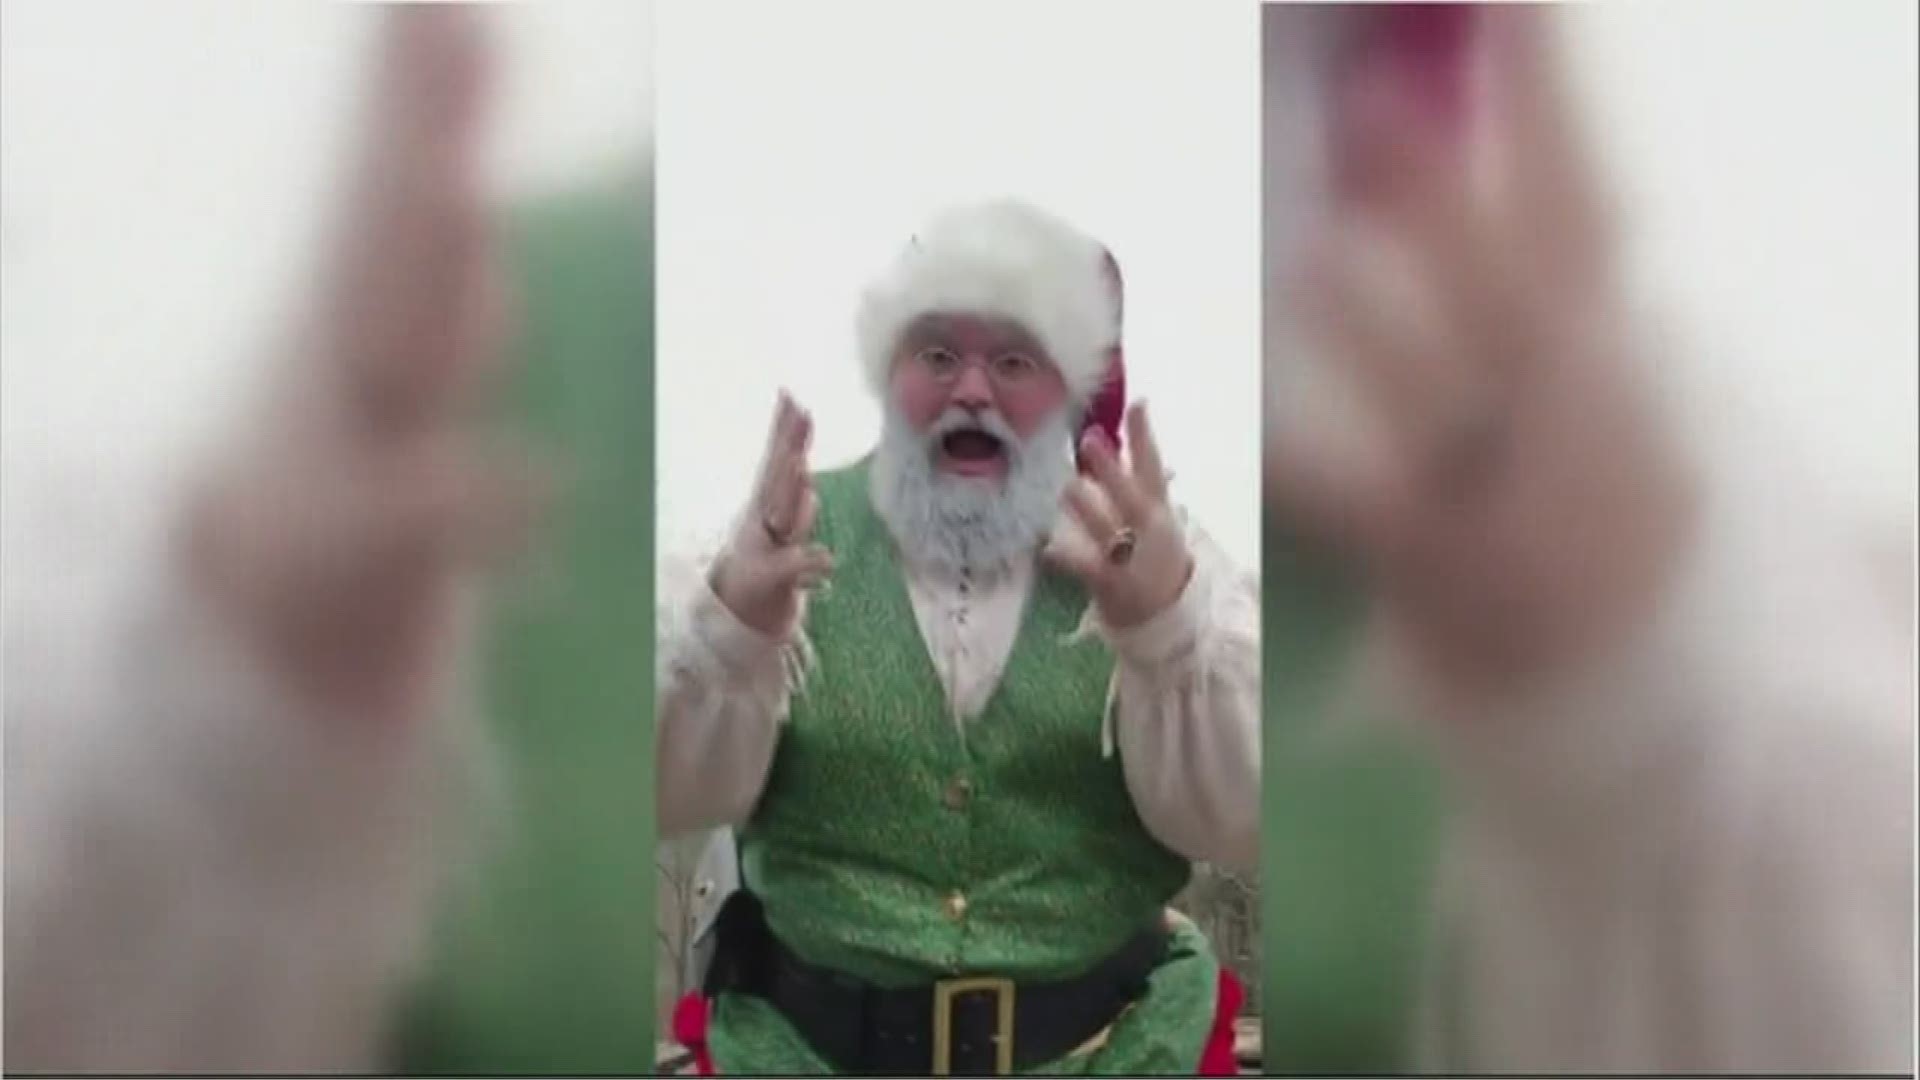 Jarod Mills wanted to make sure that kids who use sign language to communicate got a special message from Santa Claus. The result is pure Christmas cheer.